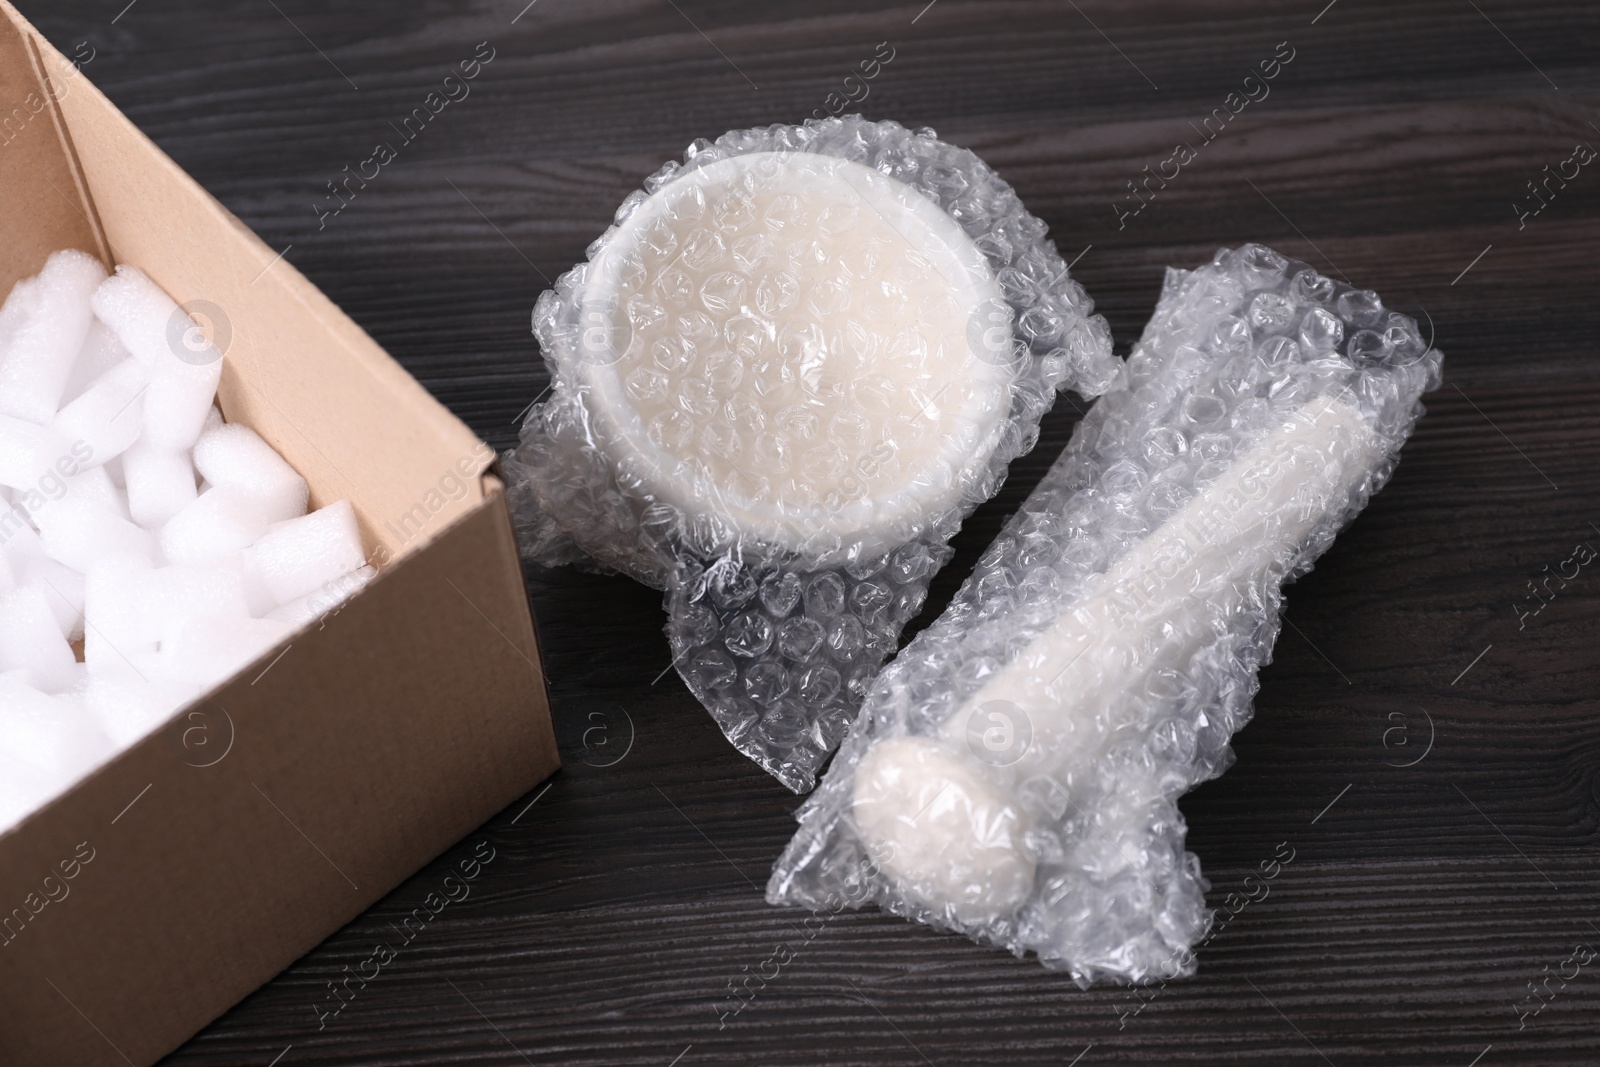 Photo of Mortar and pestle packed in bubble wrap on dark wooden table